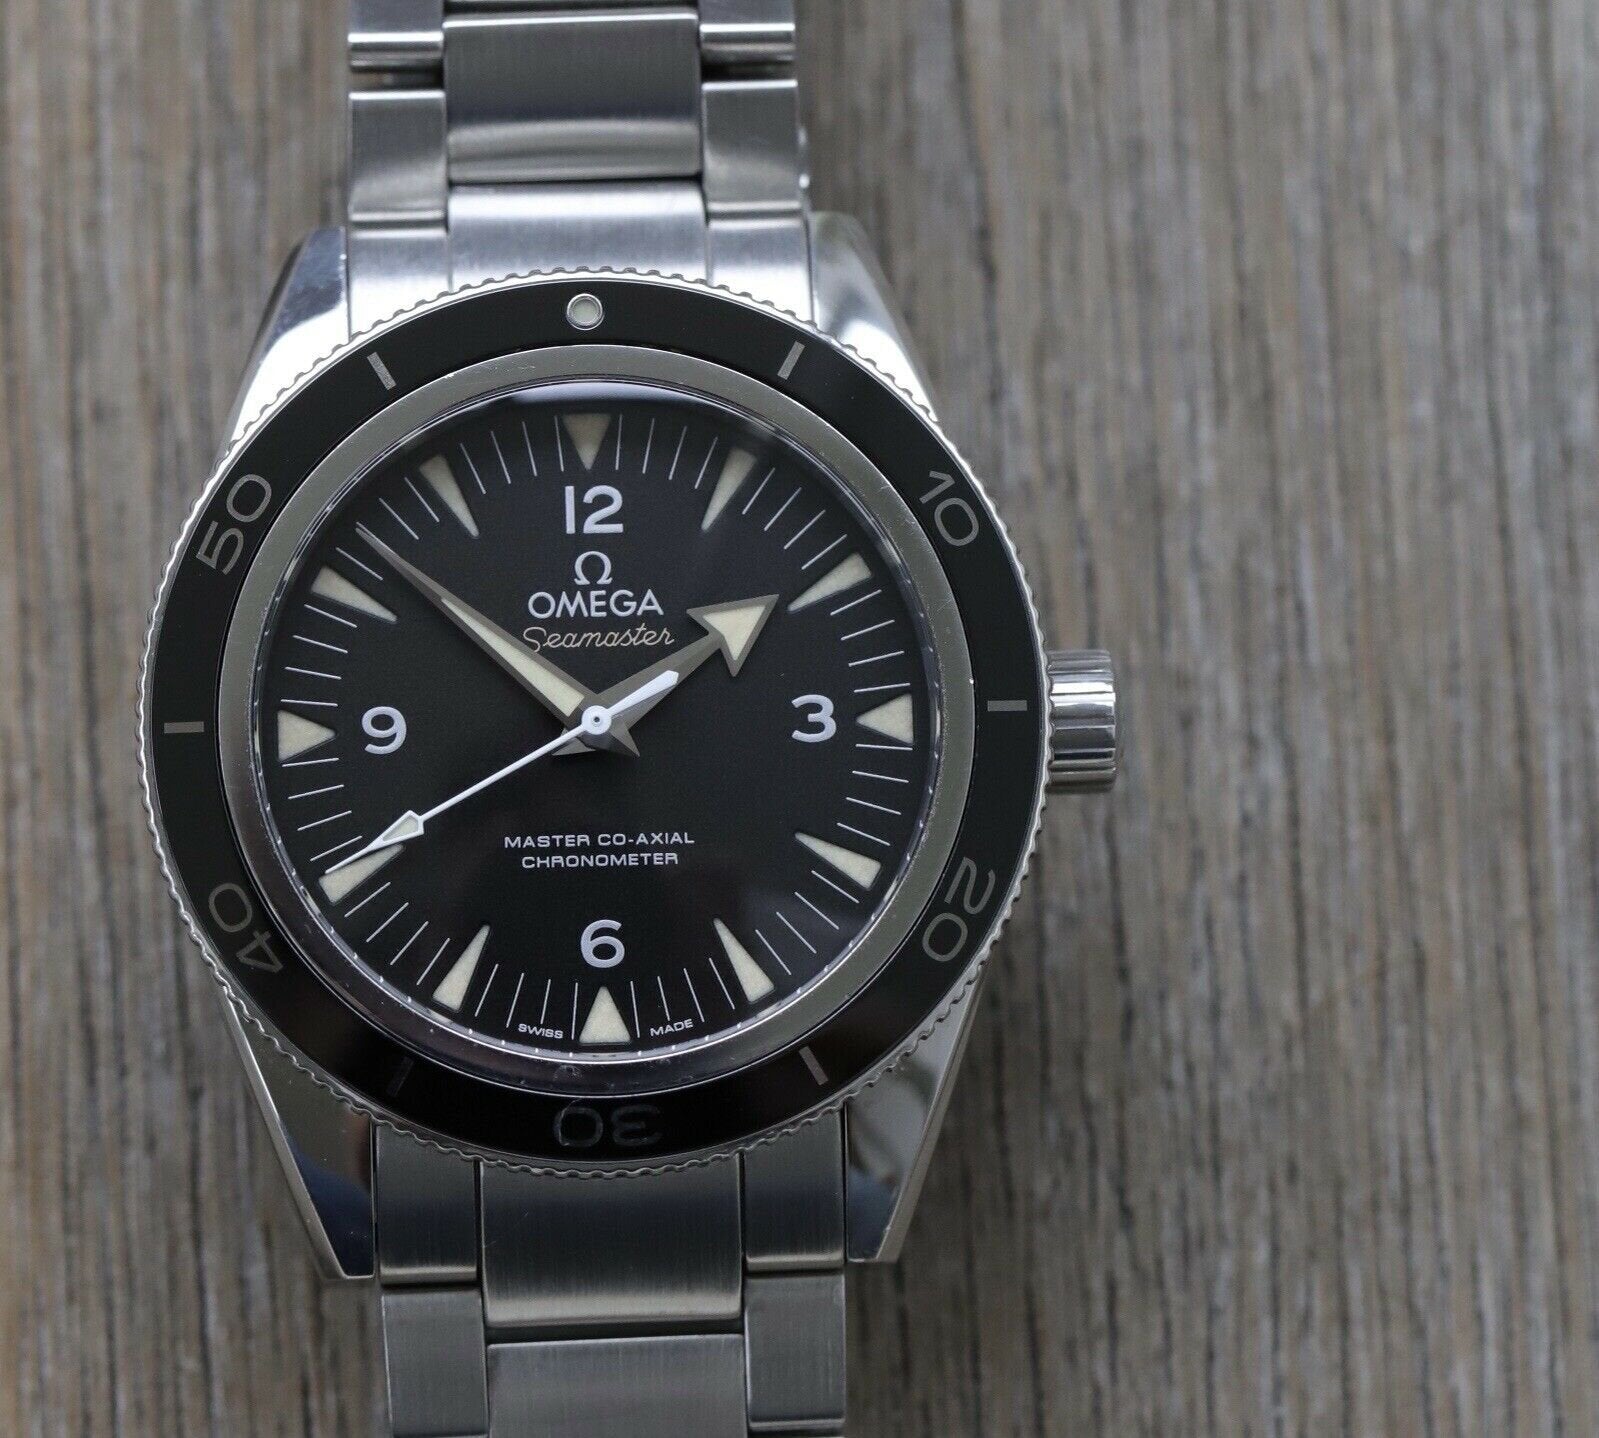 Omega_Seamaster_300_Co-Axial_41mm_233.30.41.21.01.001_-_2015_Watch_Vault_01.jpg